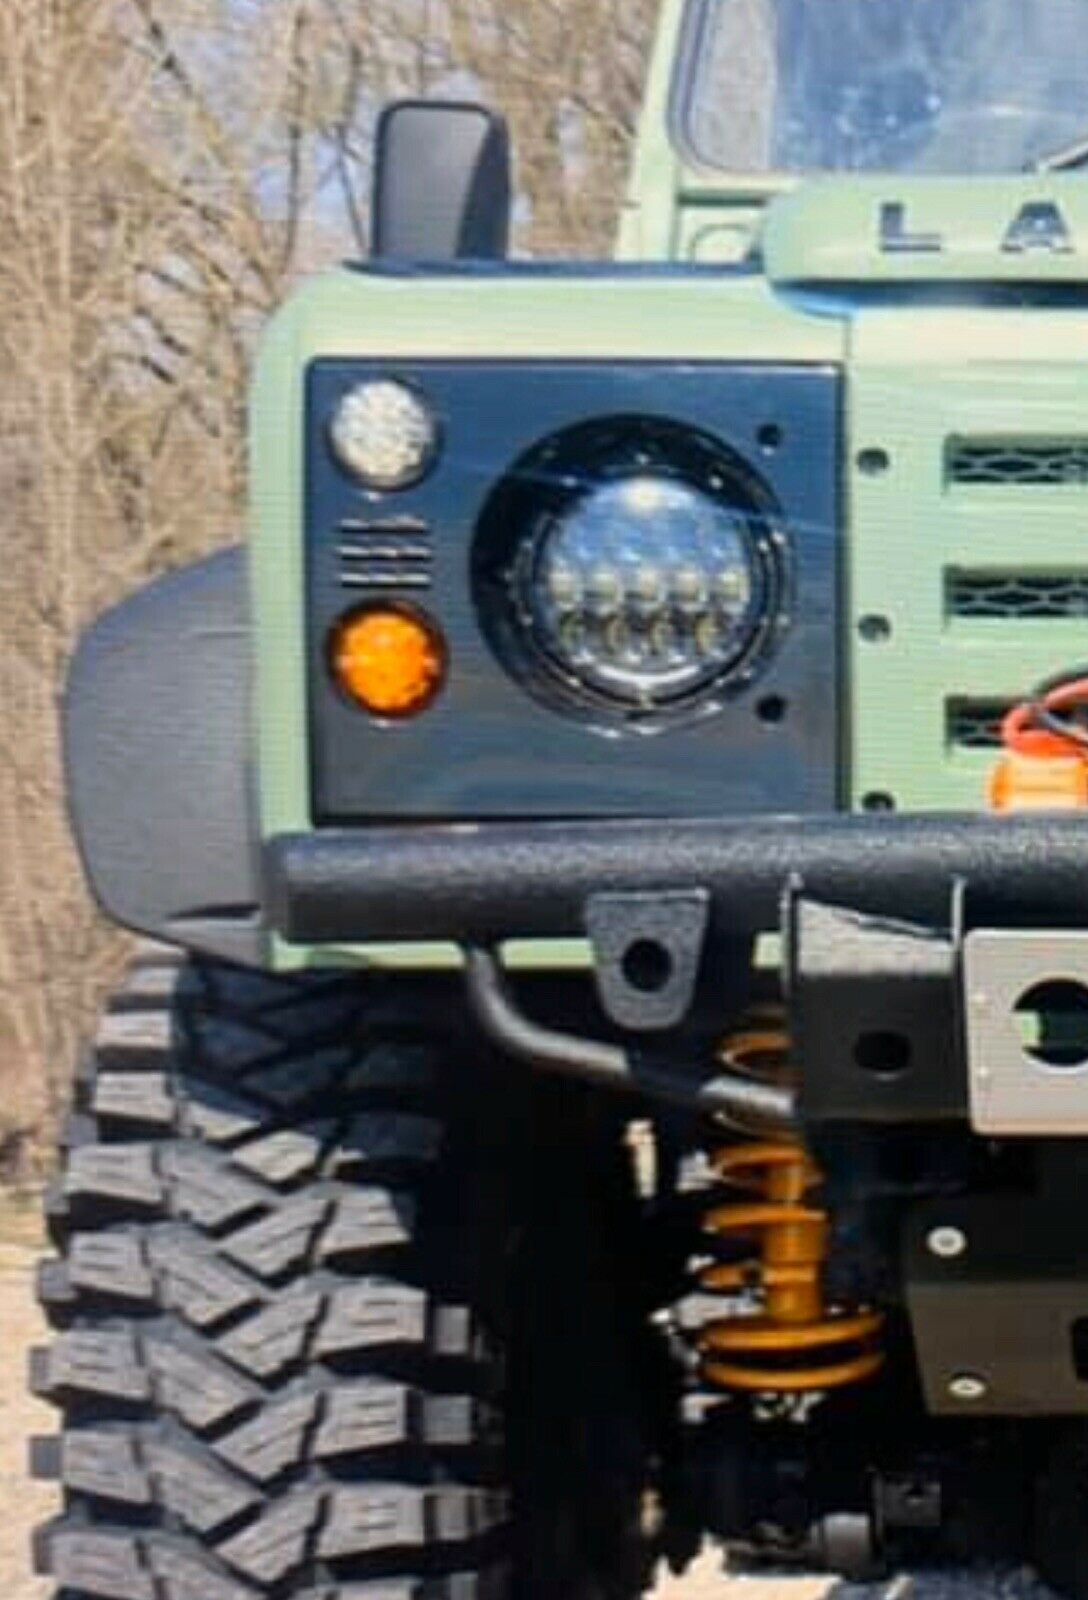 New OEM Headlight Bezel Rings for Military Humvee Black, Tan or Green for LED head lights or Incandescent. Jeep M925 M935 Deuce 5-Ton